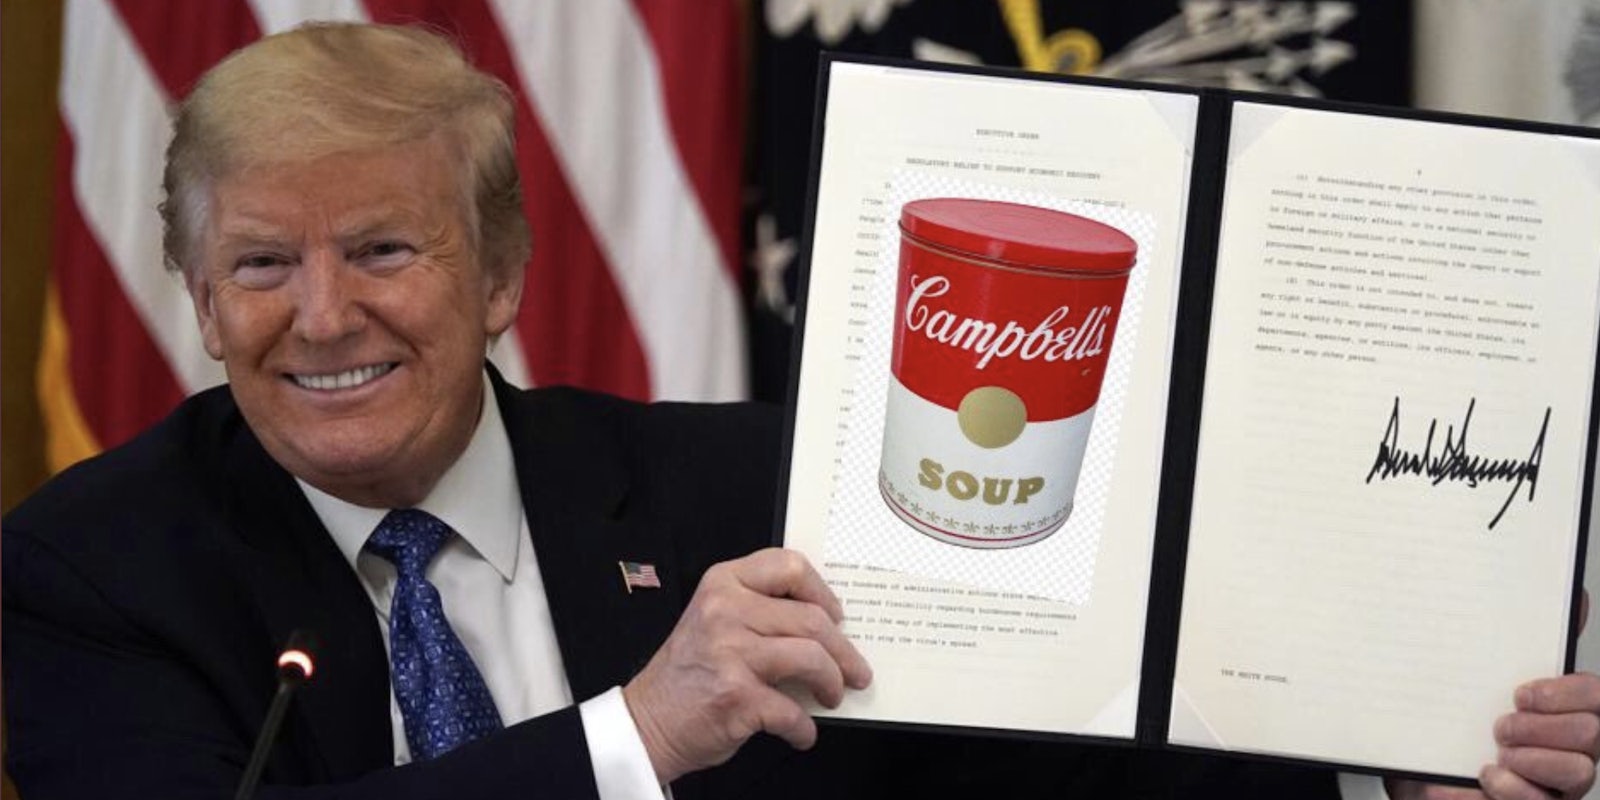 Trump holding an executive older folder with a picture of Campbells soup on it